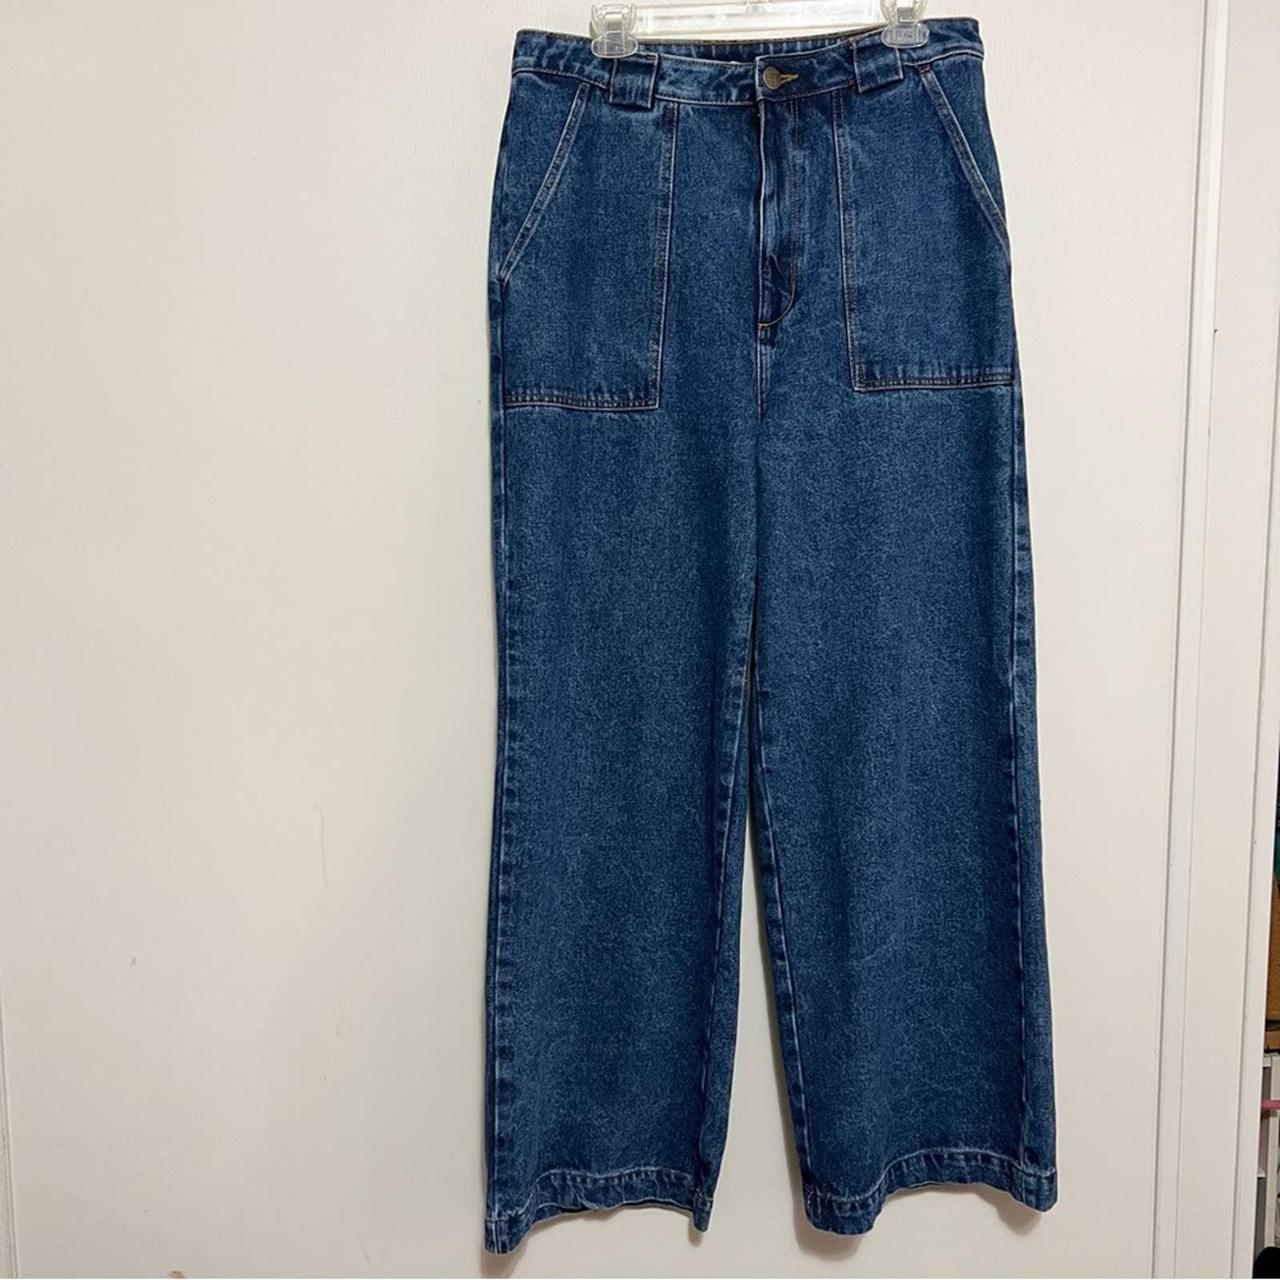 Lucy and Yak Women's Blue Jeans | Depop